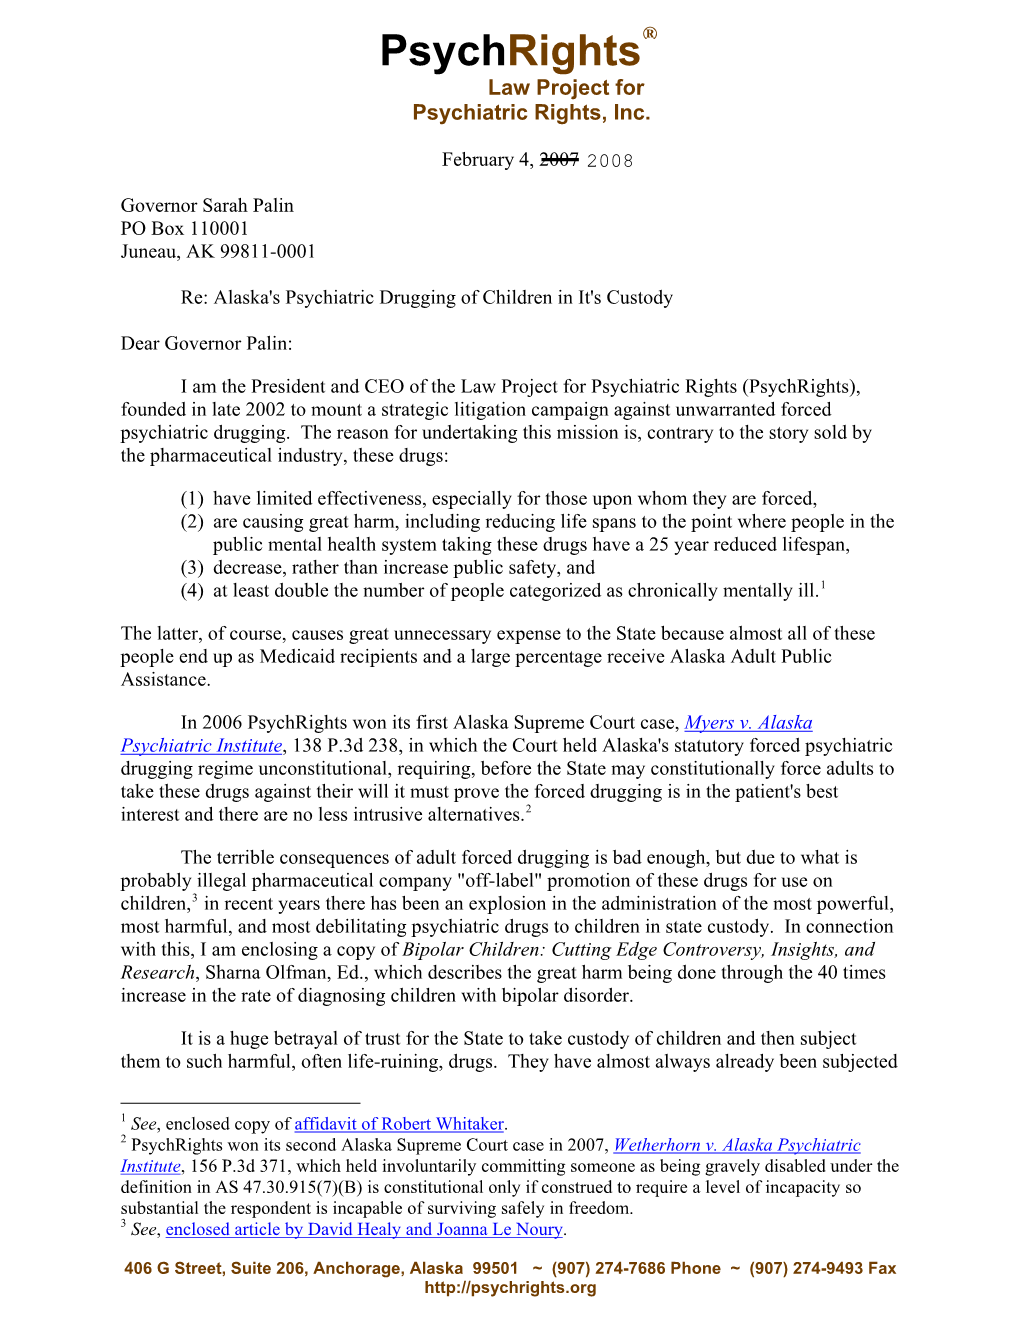 February 4, 2008, Letter to Governor Palin